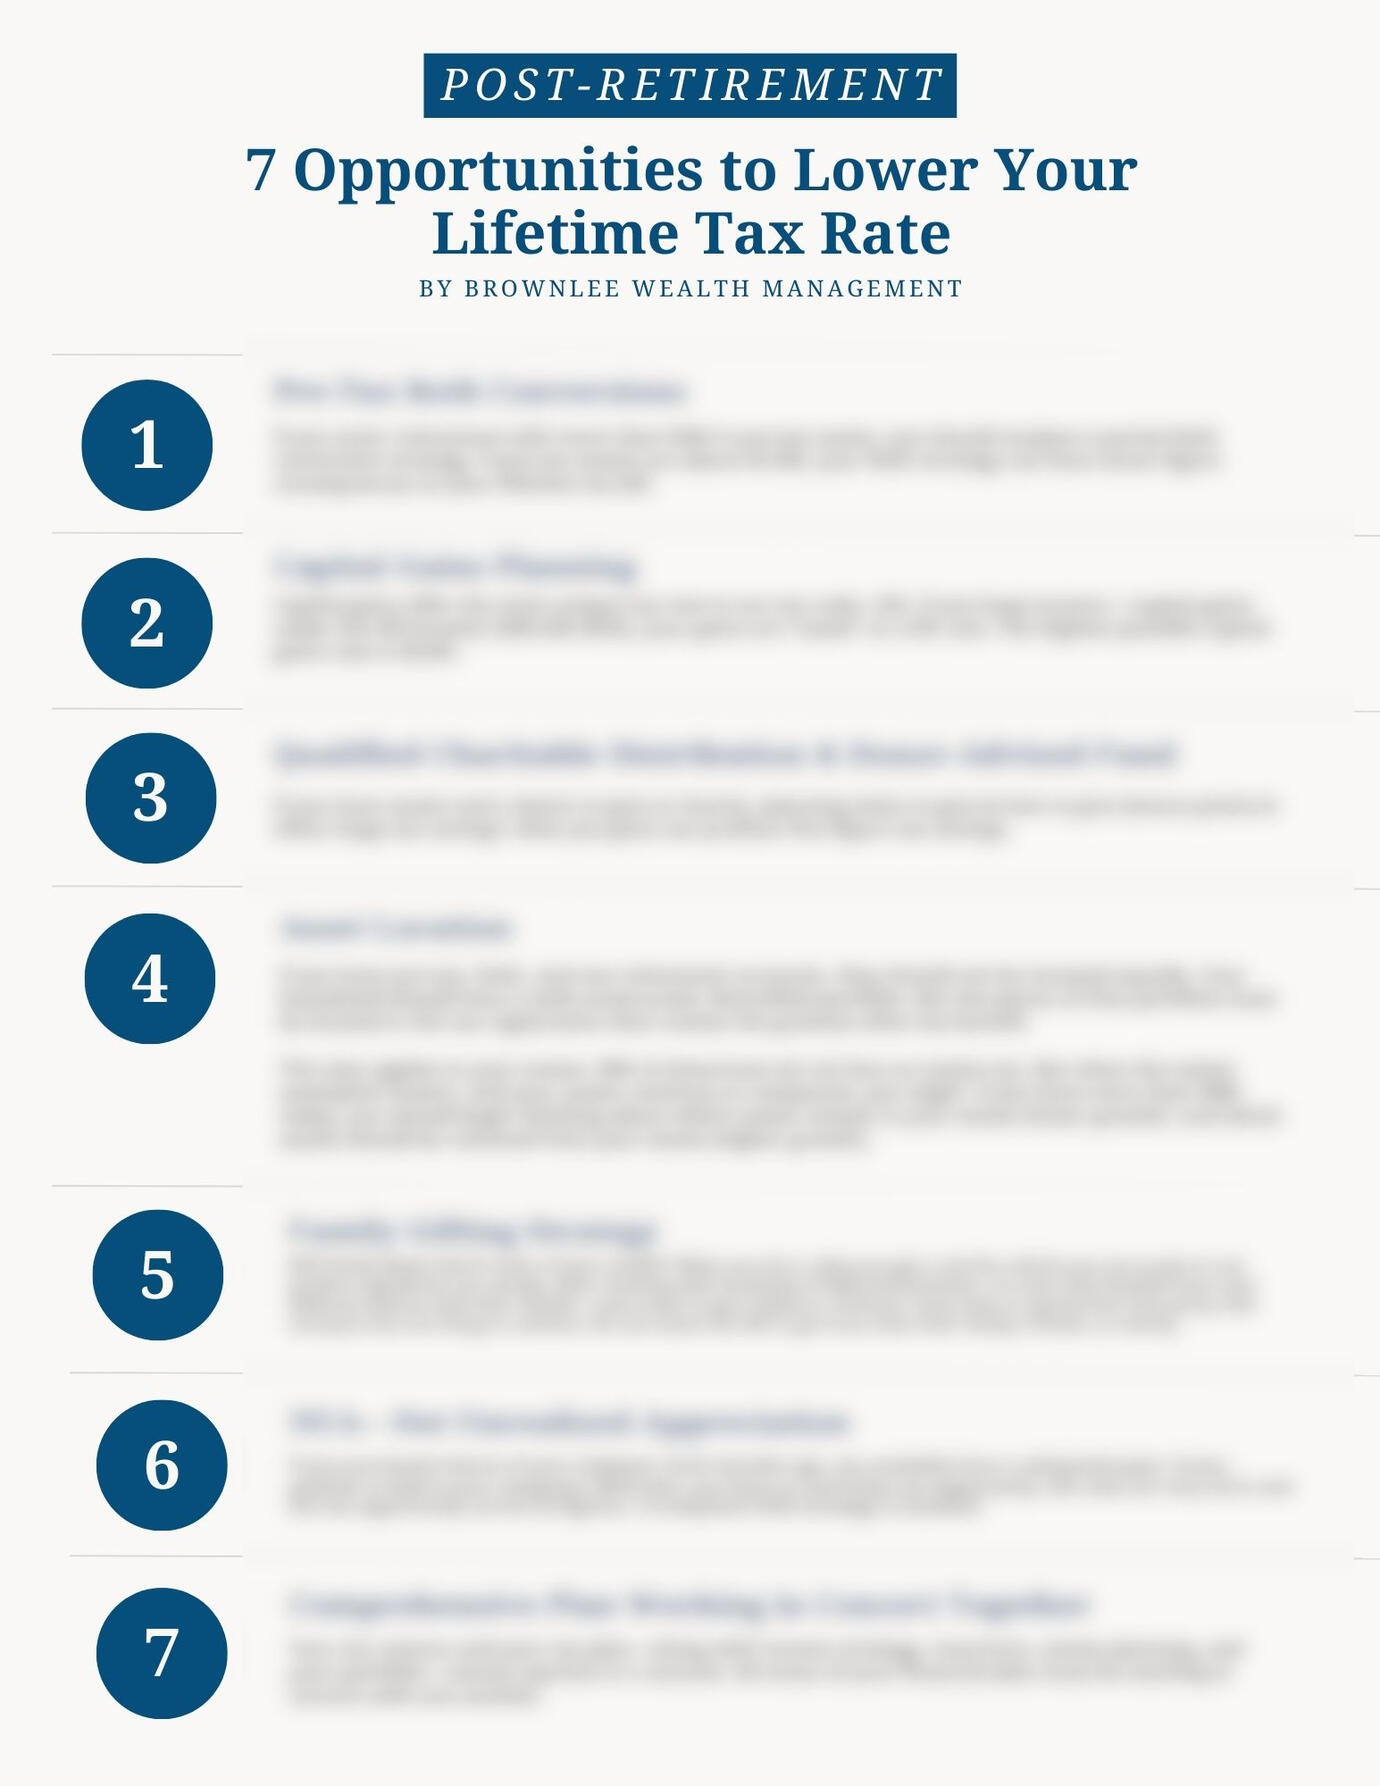 7 opportunities to lower your lifetime tax rate guide